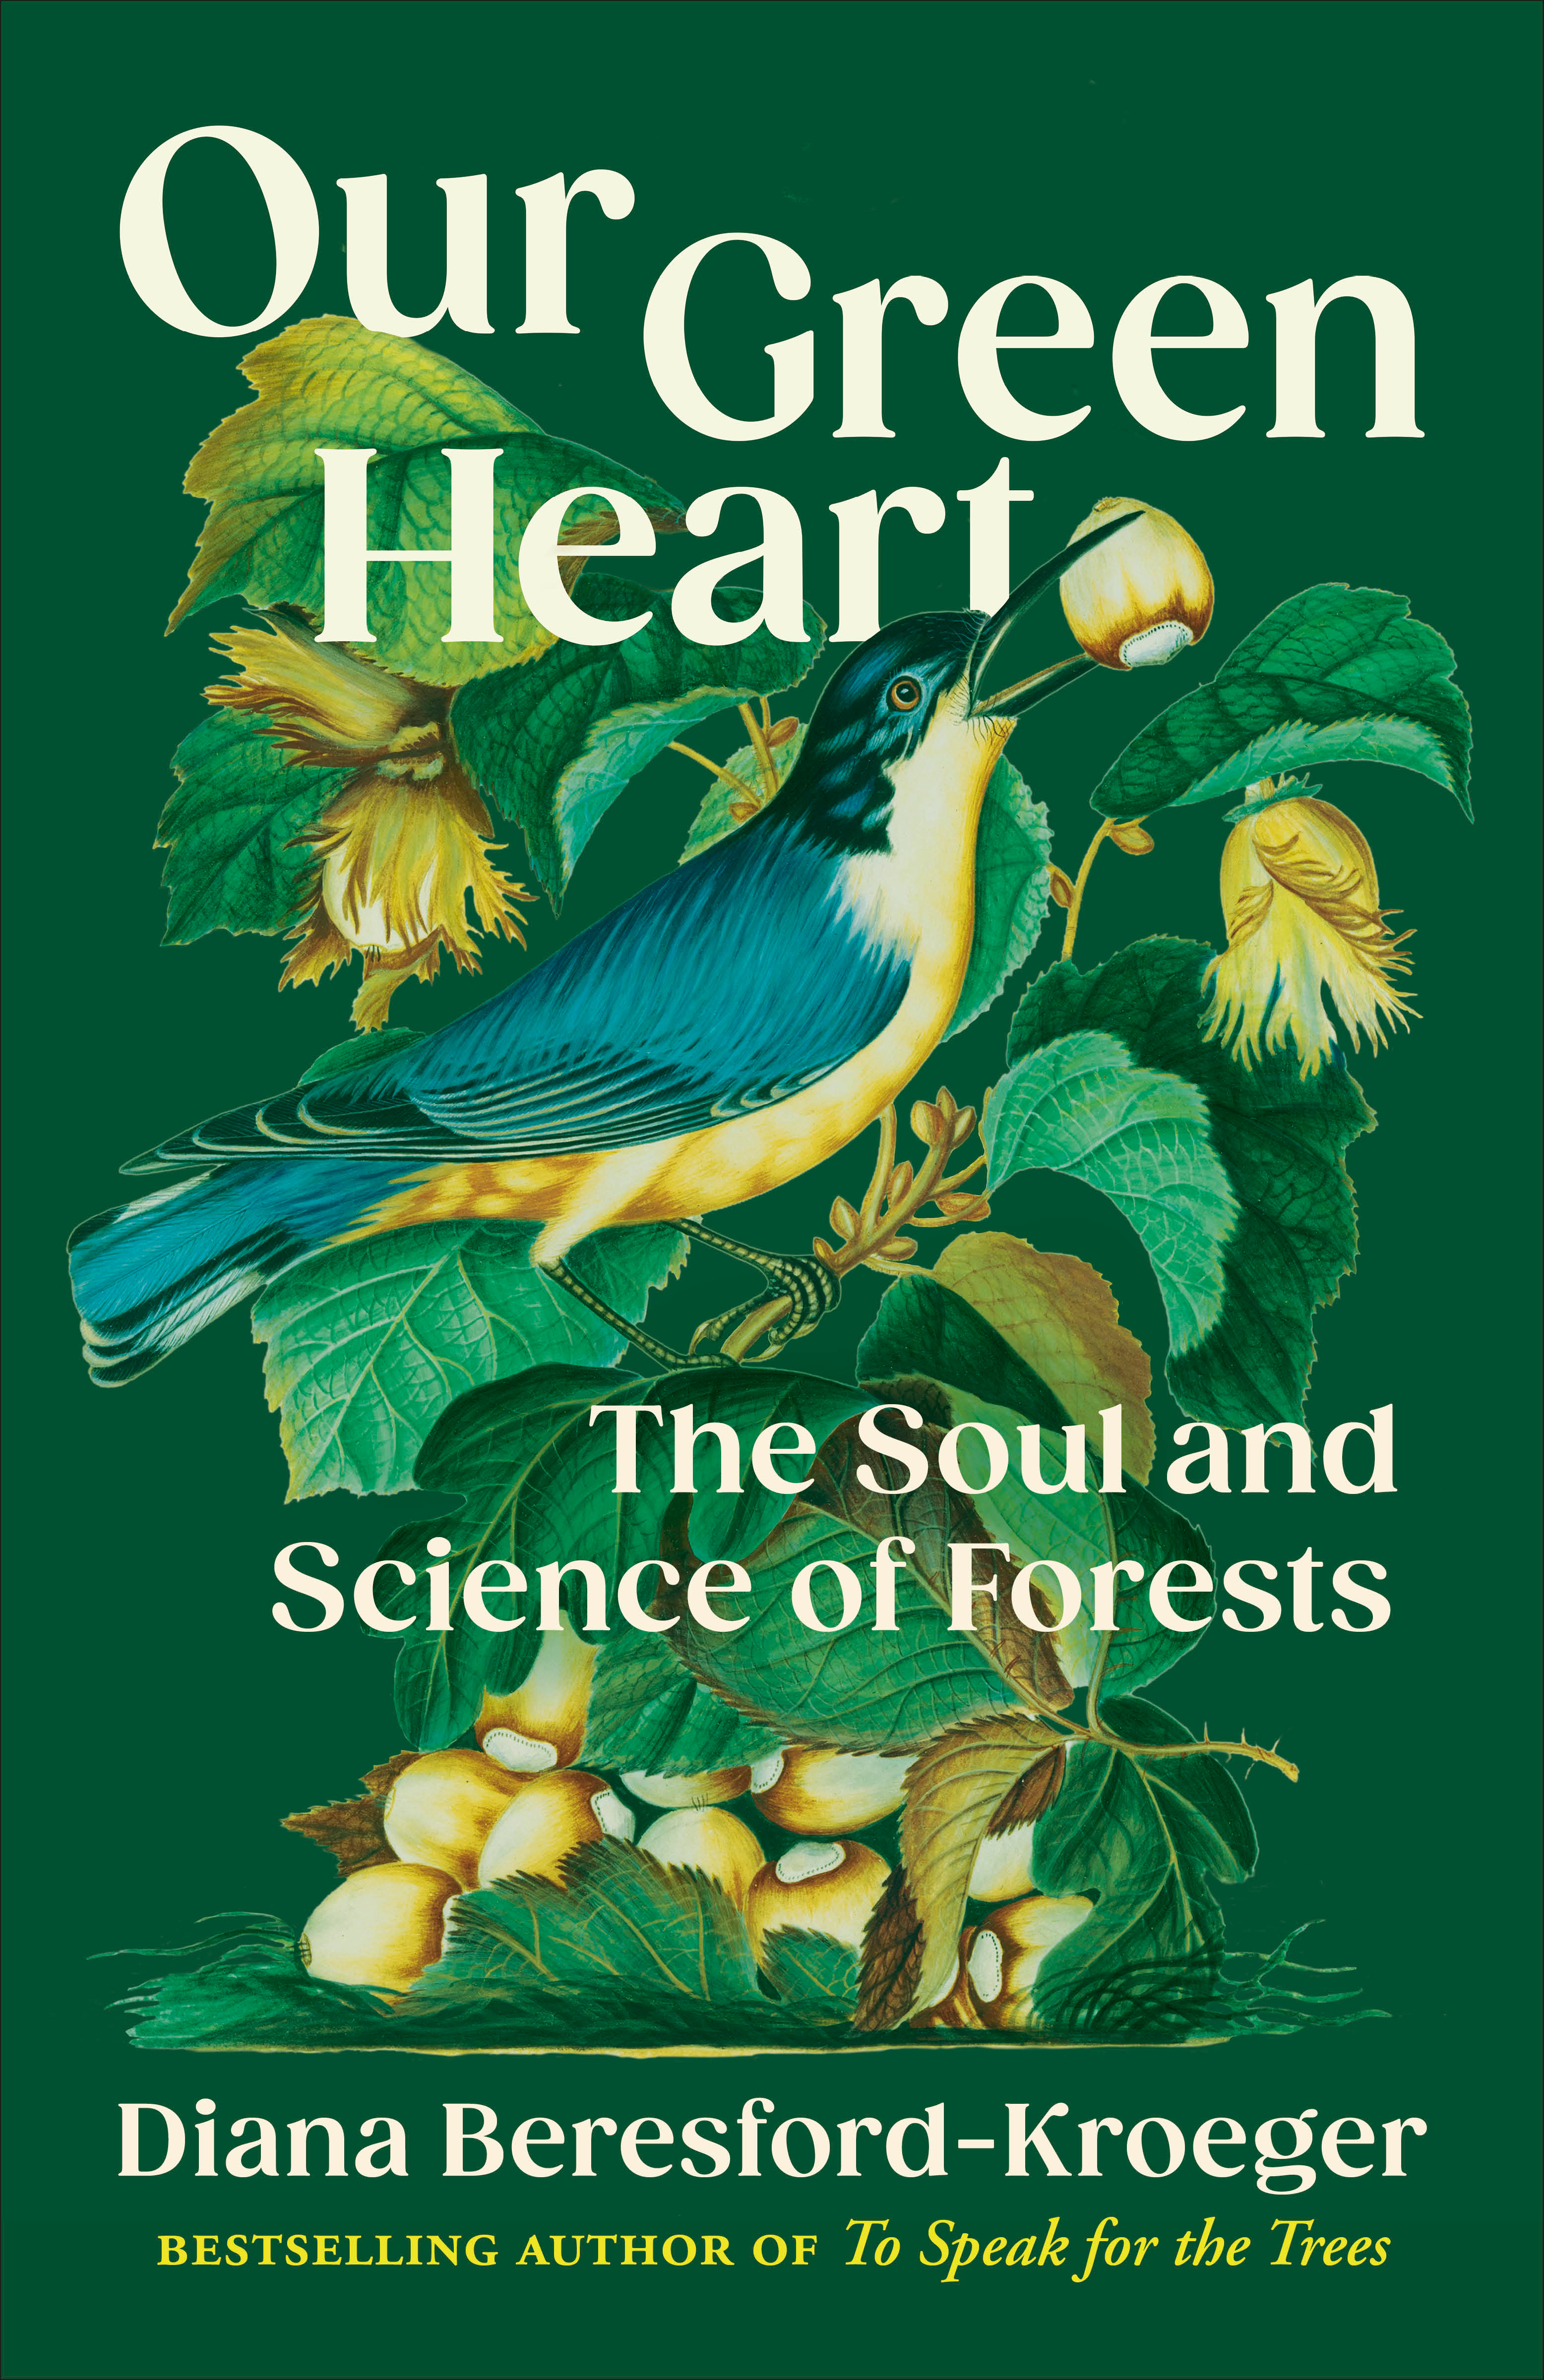 OUR GREEN HEART, by BERESFORD-KROEGER, DIANA